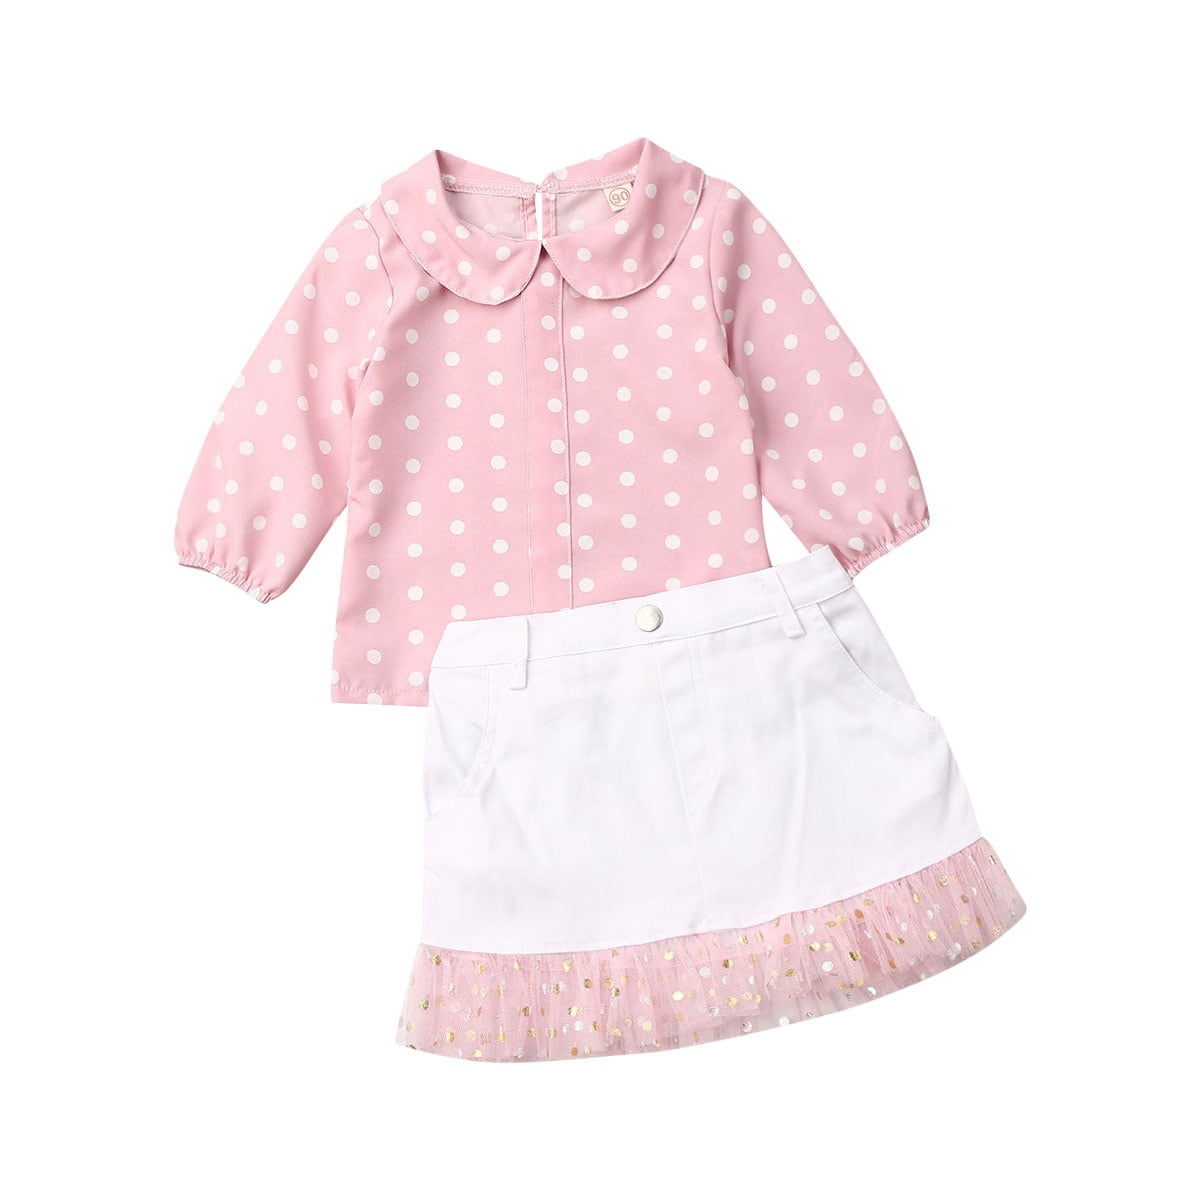 Wide.ling Toddler Baby Girl Lace Collar Top Shirt,Long Sleeve Ruffle Bodysuit Blouse Clothes